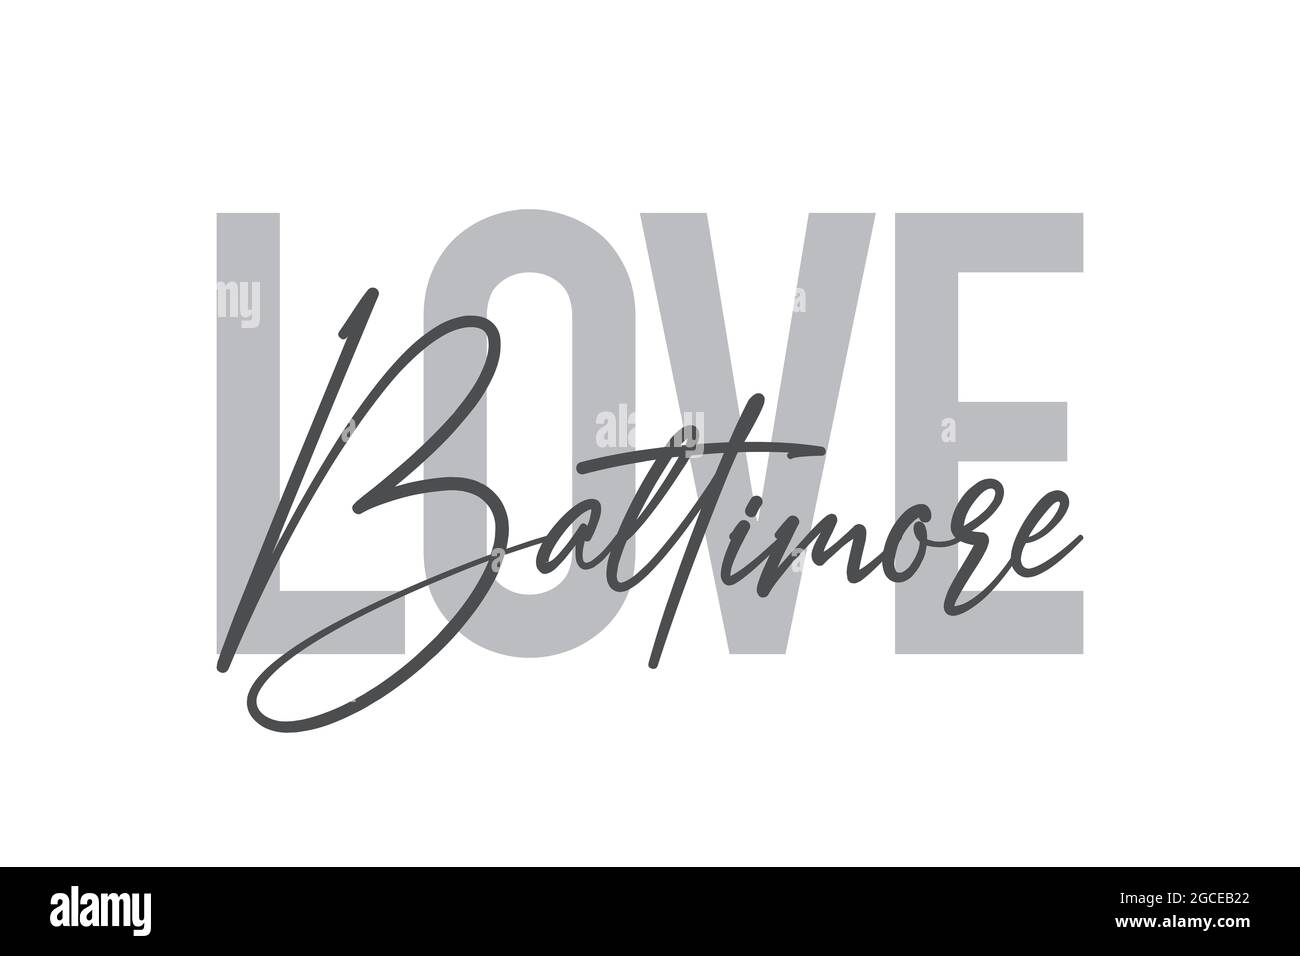 Modern, simple, minimal typographic design of a saying 'Love Baltimore' in tones of grey color. Cool, urban, trendy and playful graphic vector art wit Stock Photo